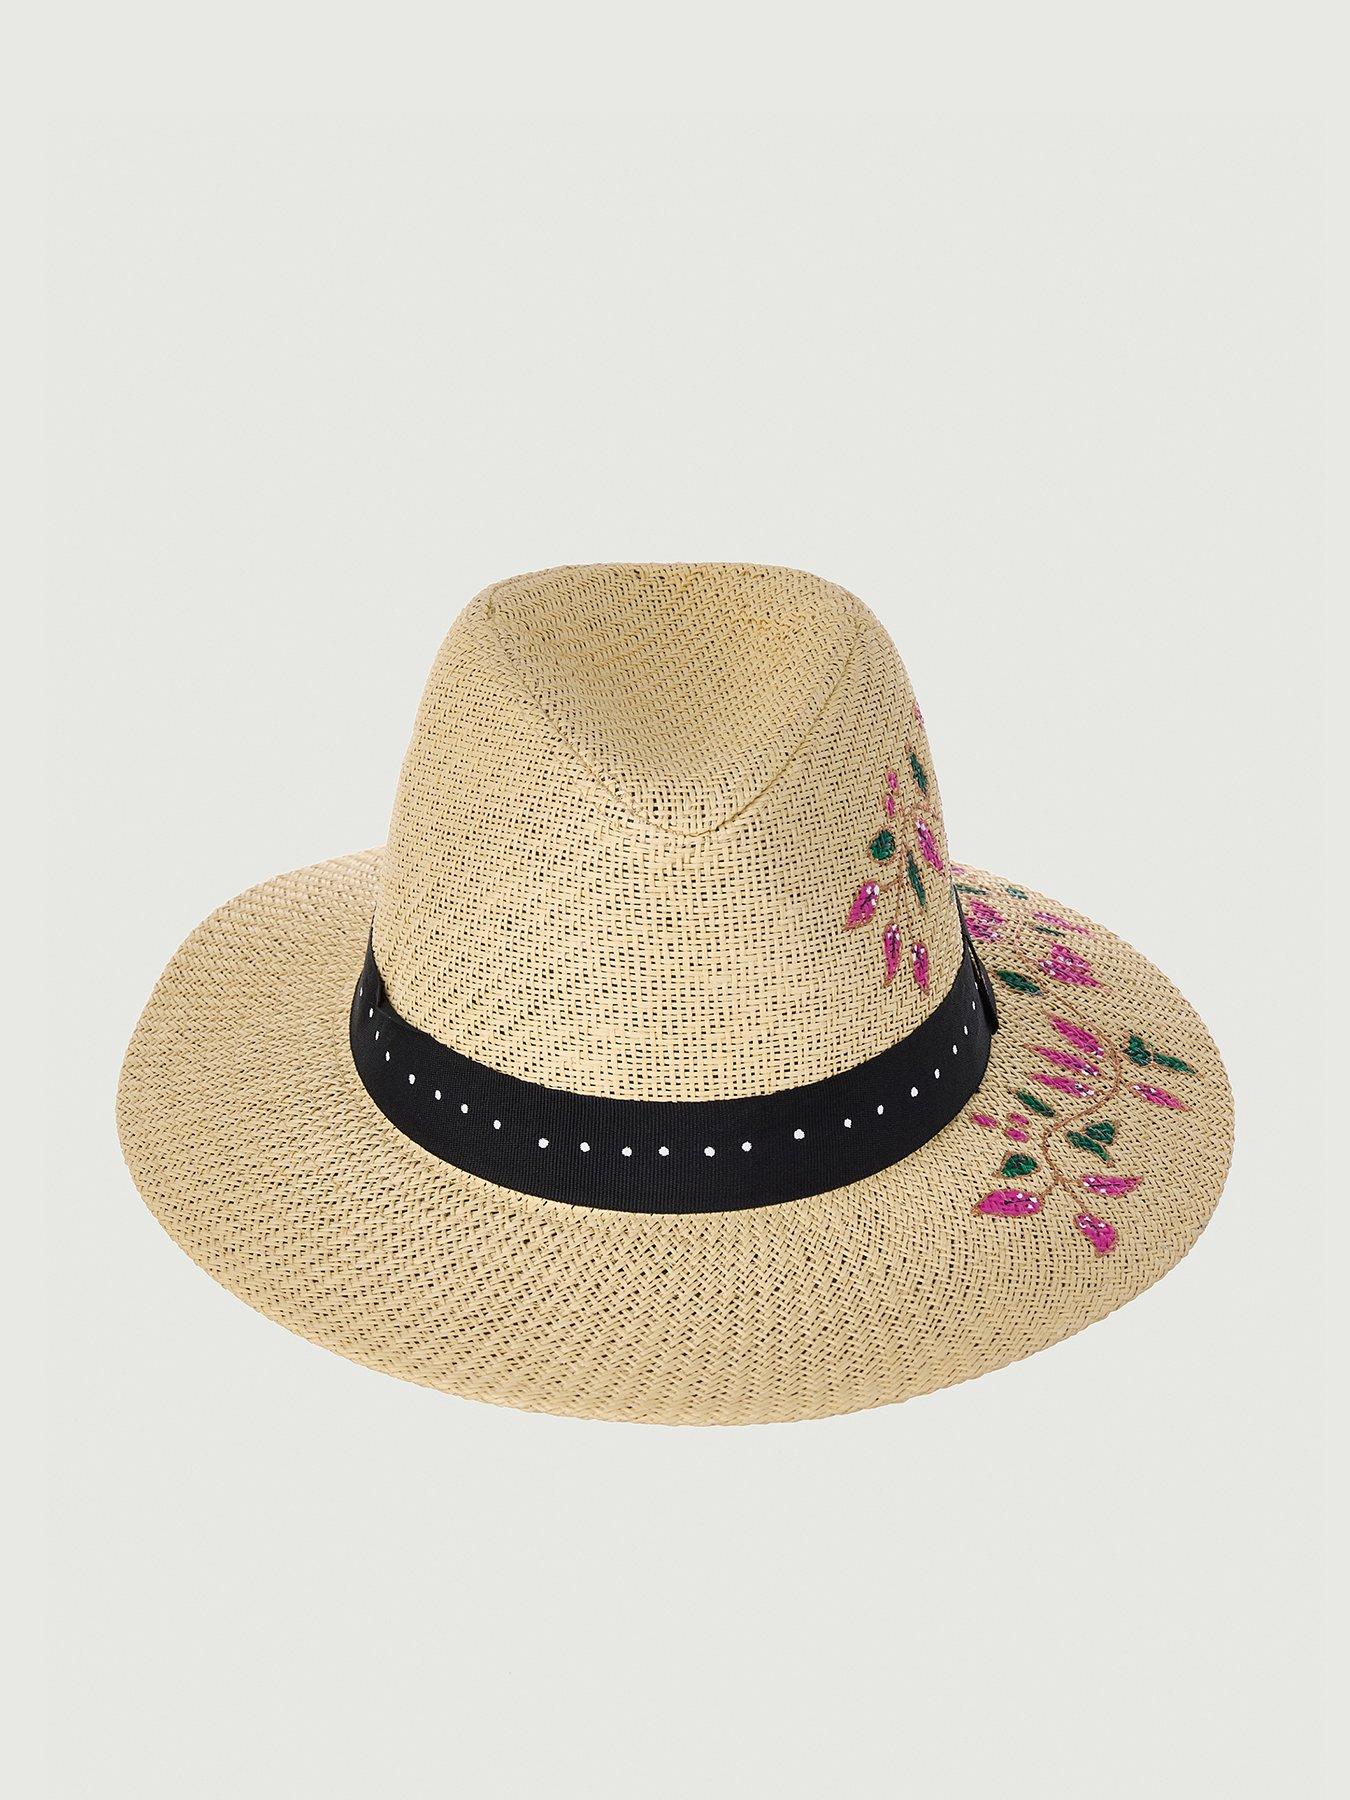 Sorena Painted Floral Straw Fedora Hat | Very.co.uk